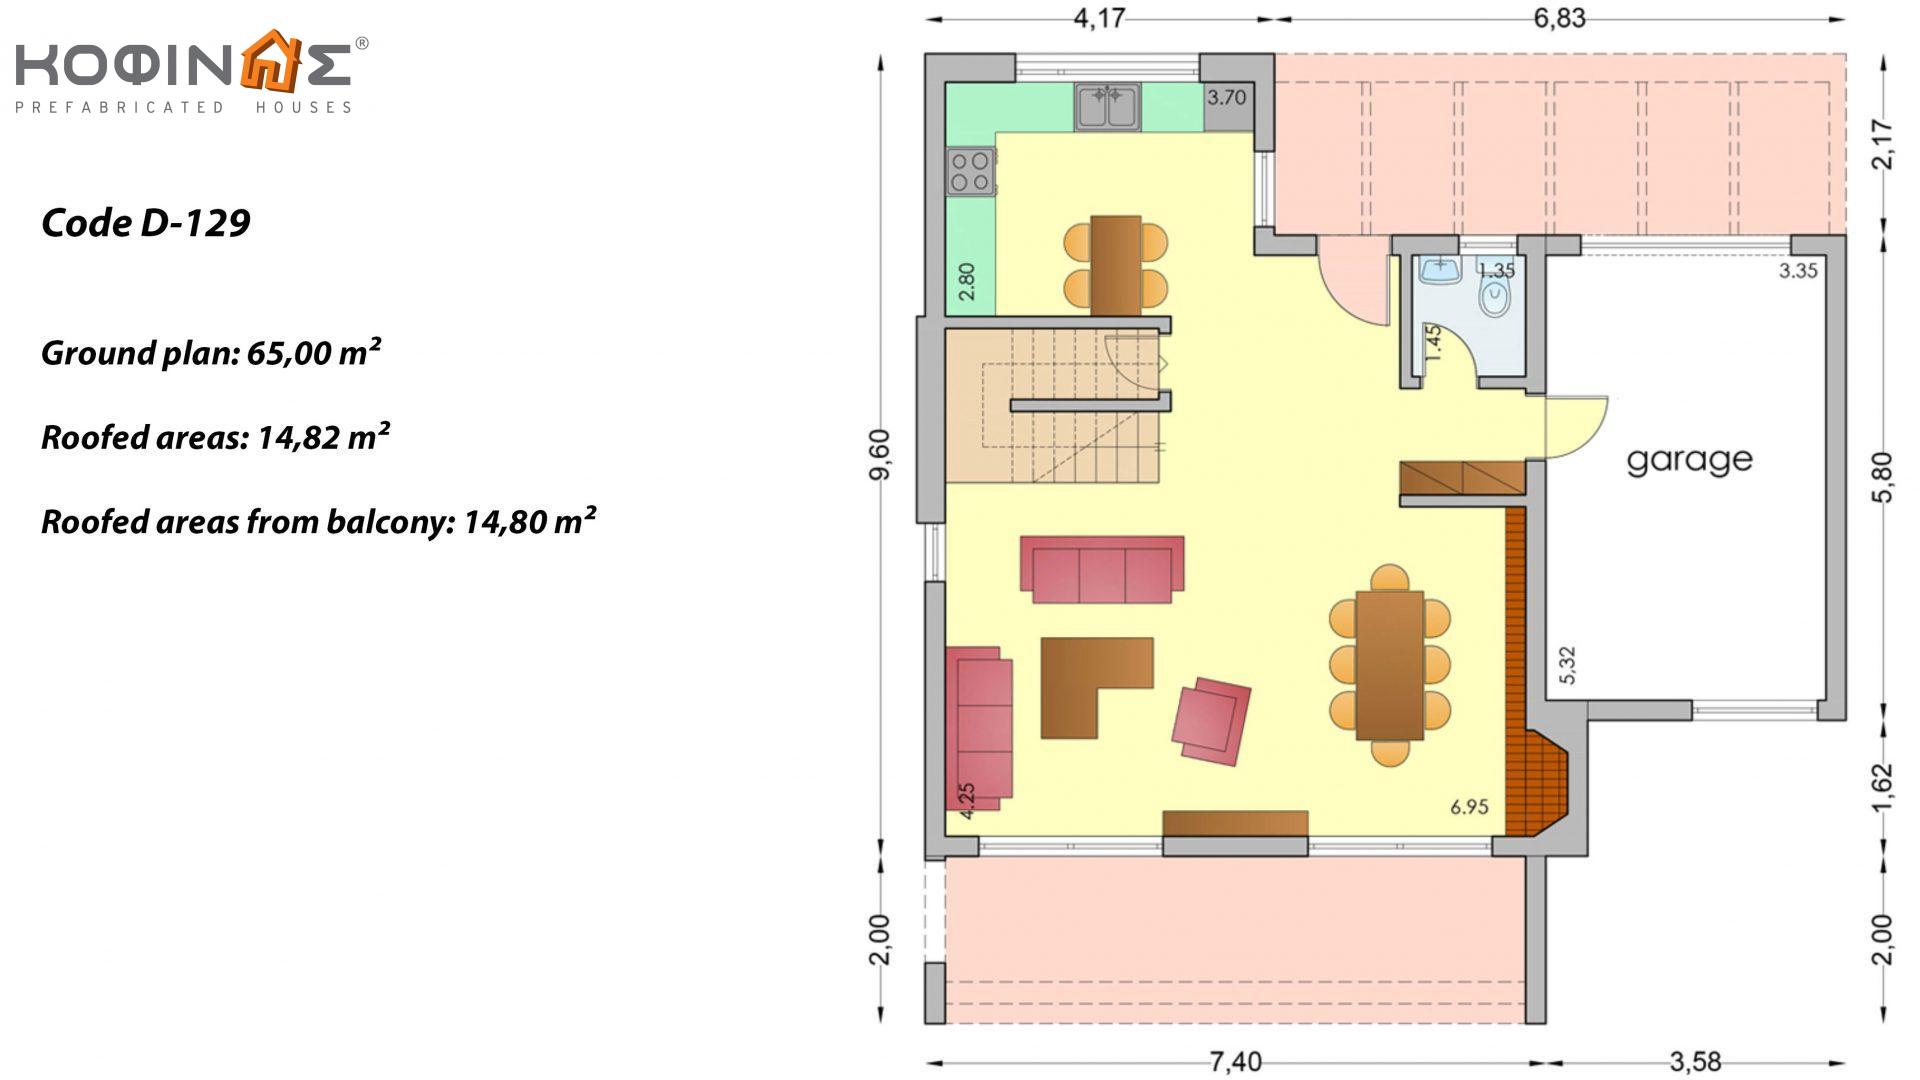 2-story house D-129, total surface of 129,50 m², +Garage 20.77 m²(=150.27 m²),covered roofed areas 40.70 m²,balconies 11.10 m²